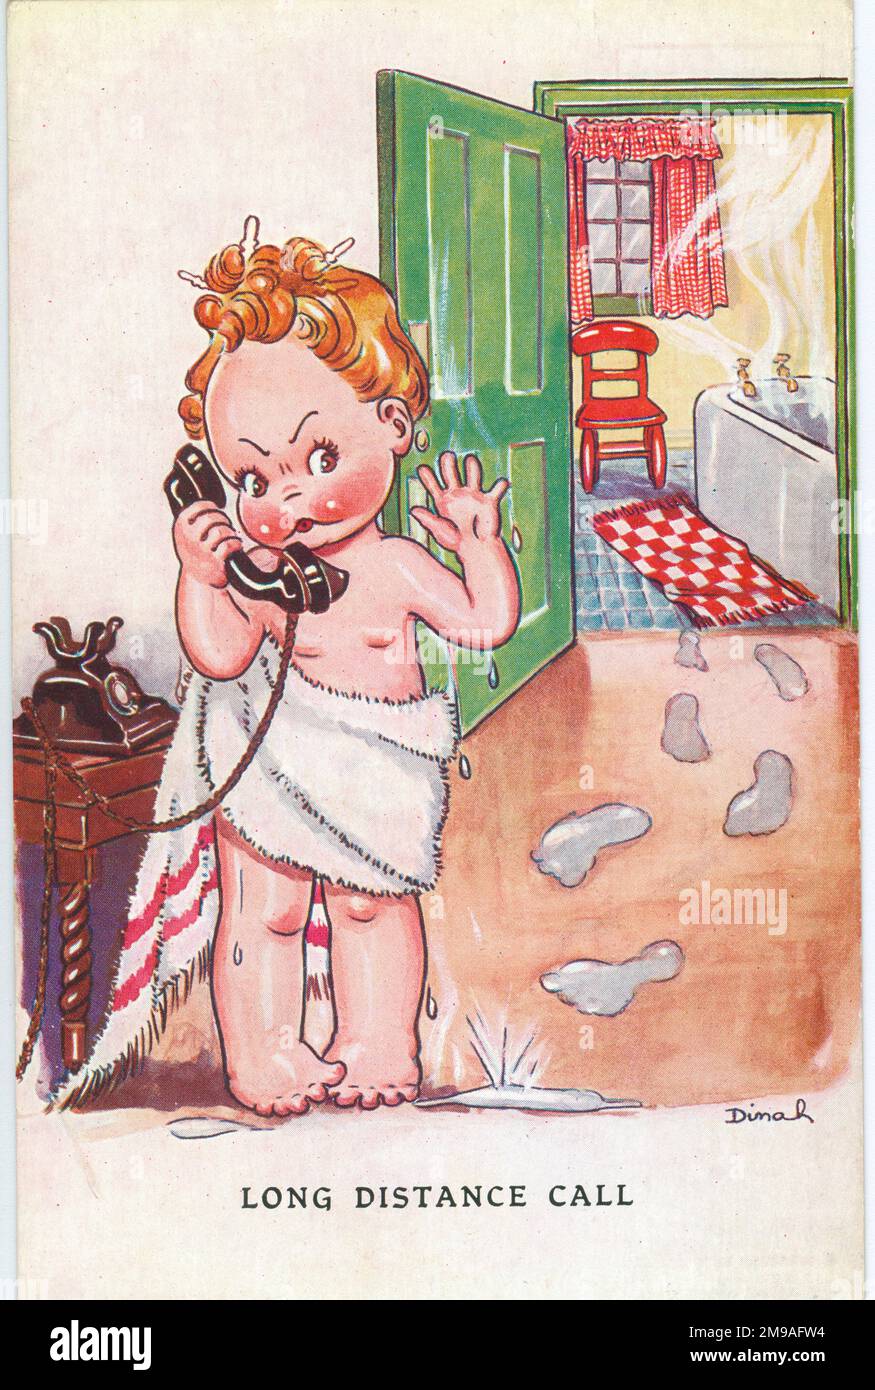 The postcard caption is 'Long distance call'. Churchill's message on the back is 'Express your thanks by building tanks'.  The sender's message suggests that the relationship is under strain - 'My Darling, Perhaps in the near future I shall have a long distance call. I wonder if I'd recognise your voice after all this time'. Cute Kids WW2 Wartime humour Stock Photo